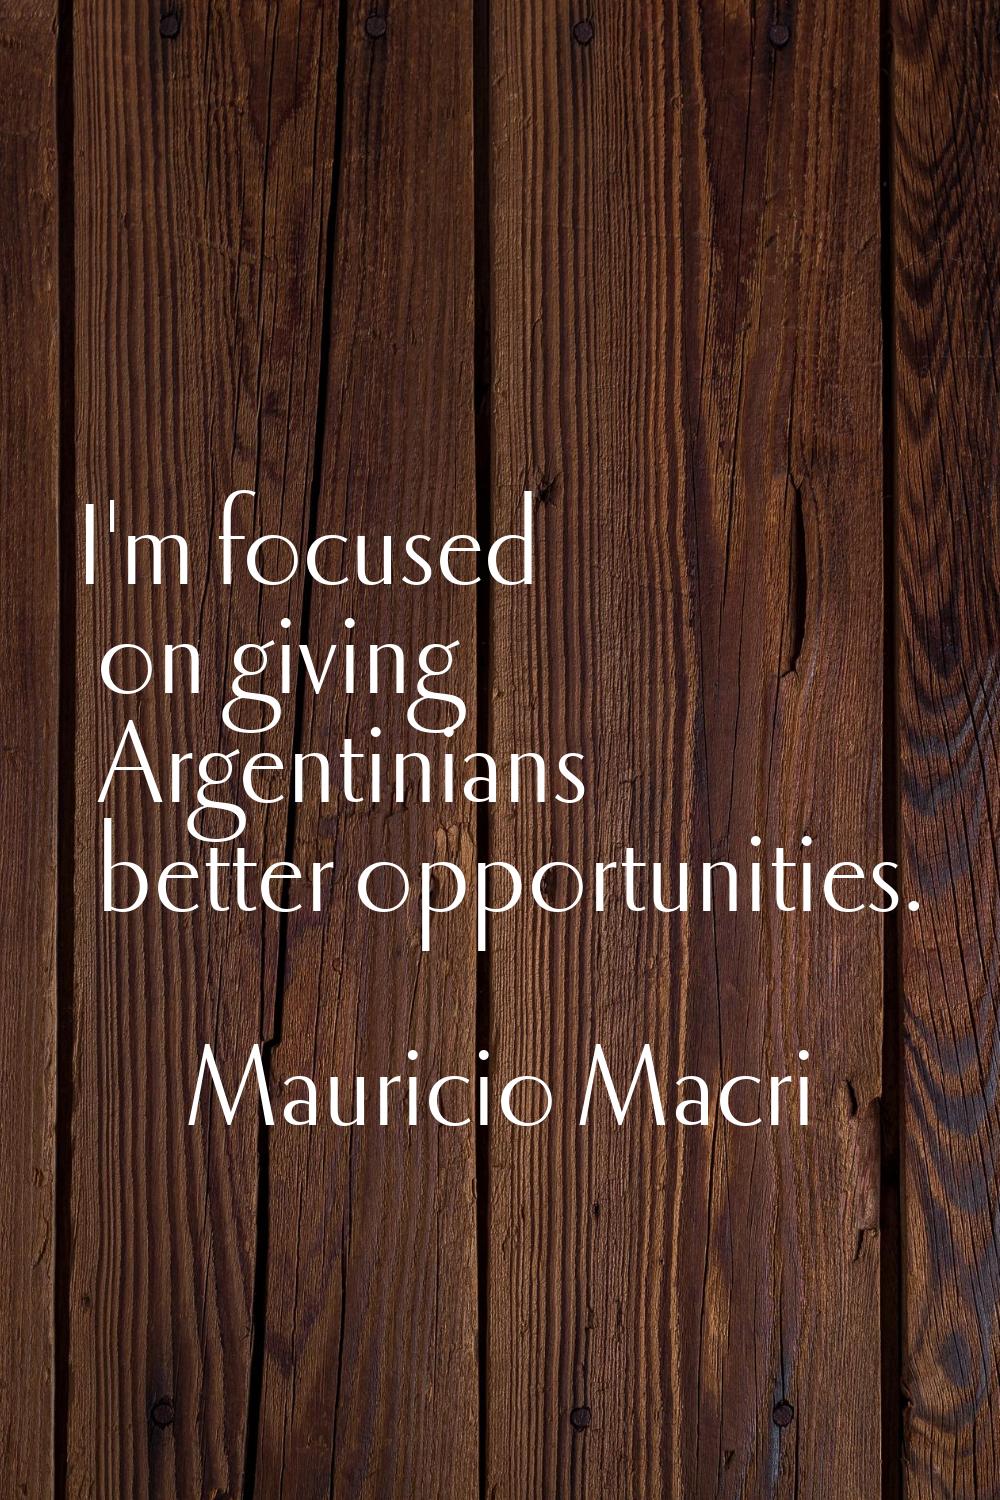 I'm focused on giving Argentinians better opportunities.